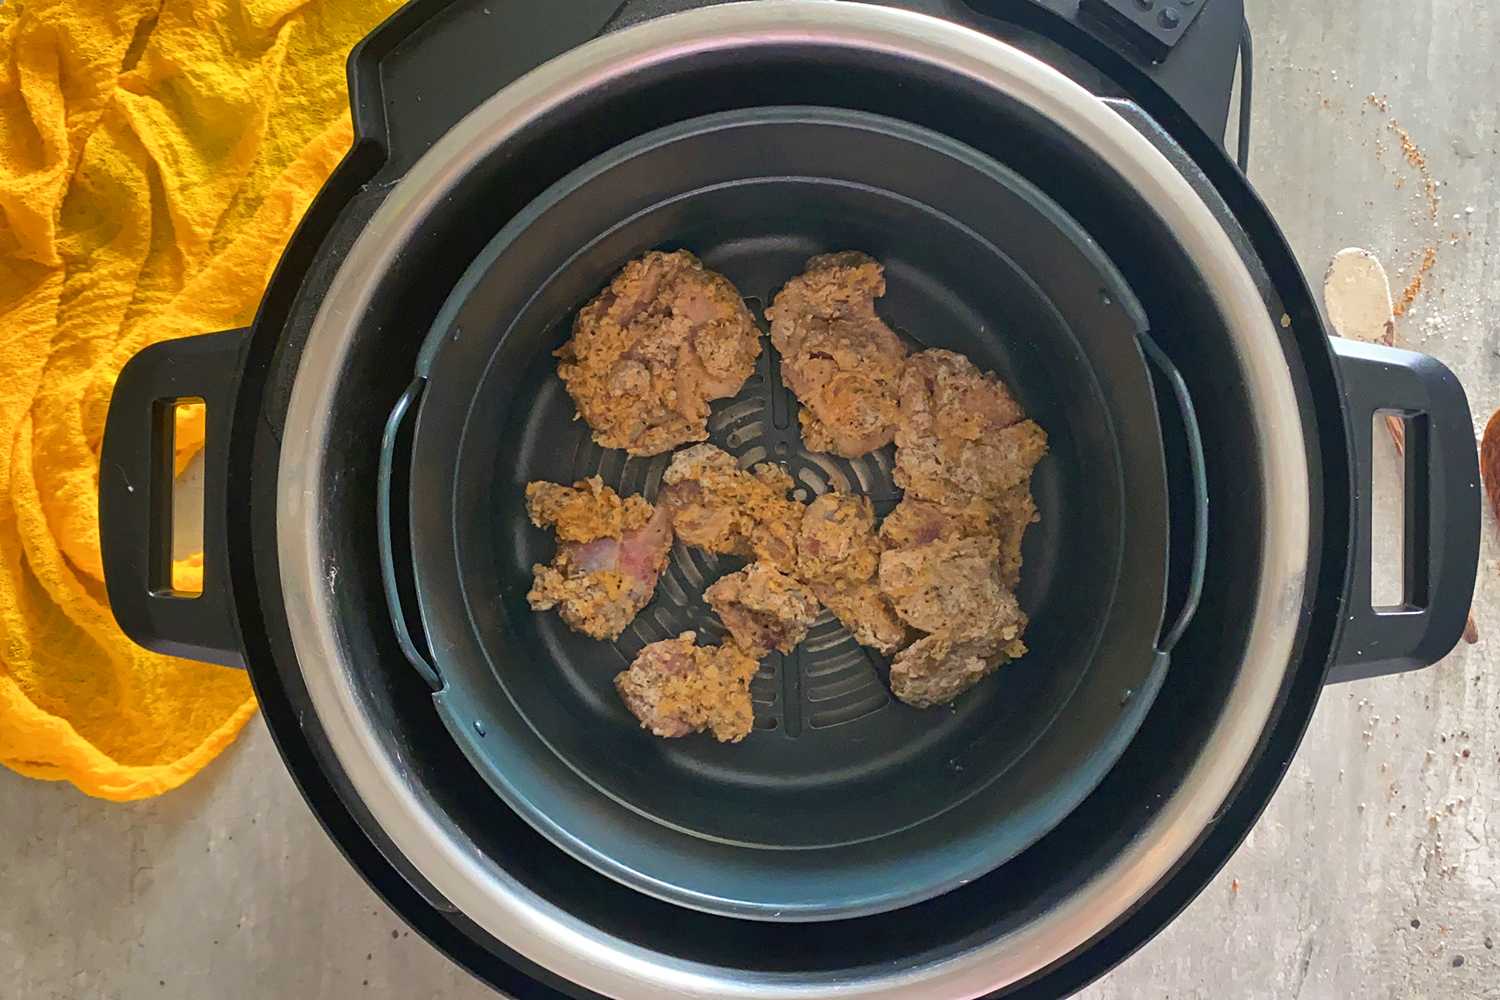 How Long Do I Cook Gizzards In Electric Pressure Cooker